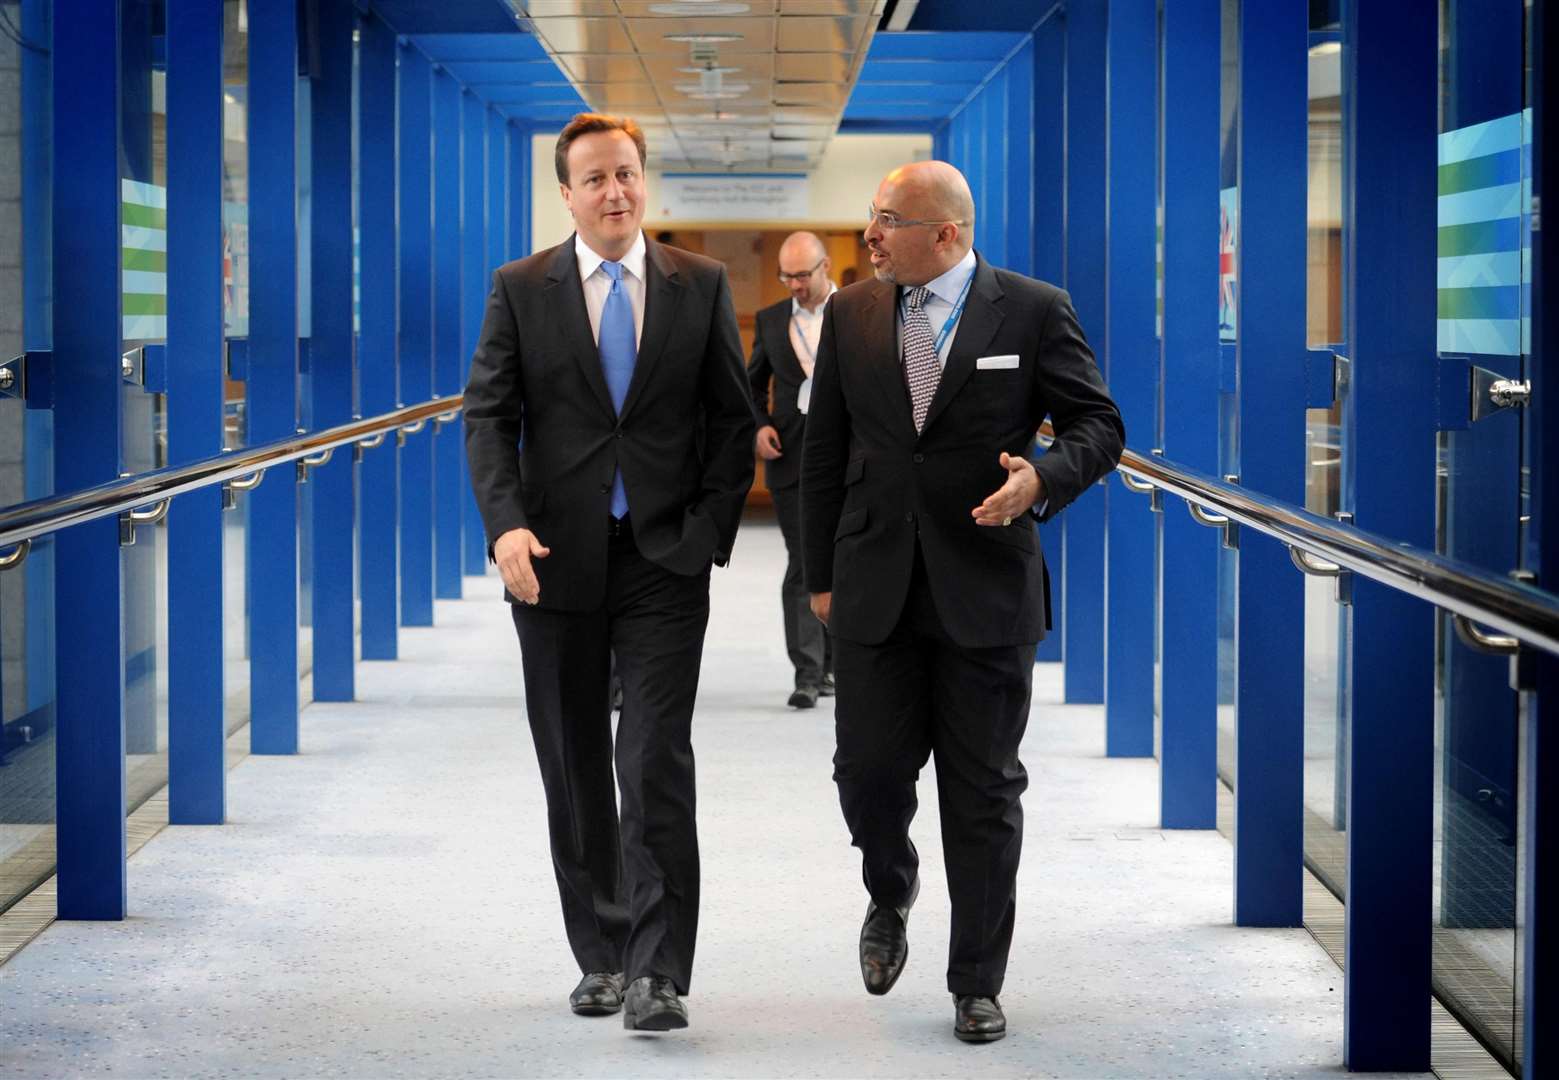 Then-prime minister David Cameron at a Conservative Party annual conference with Mr Zahawi (PA)